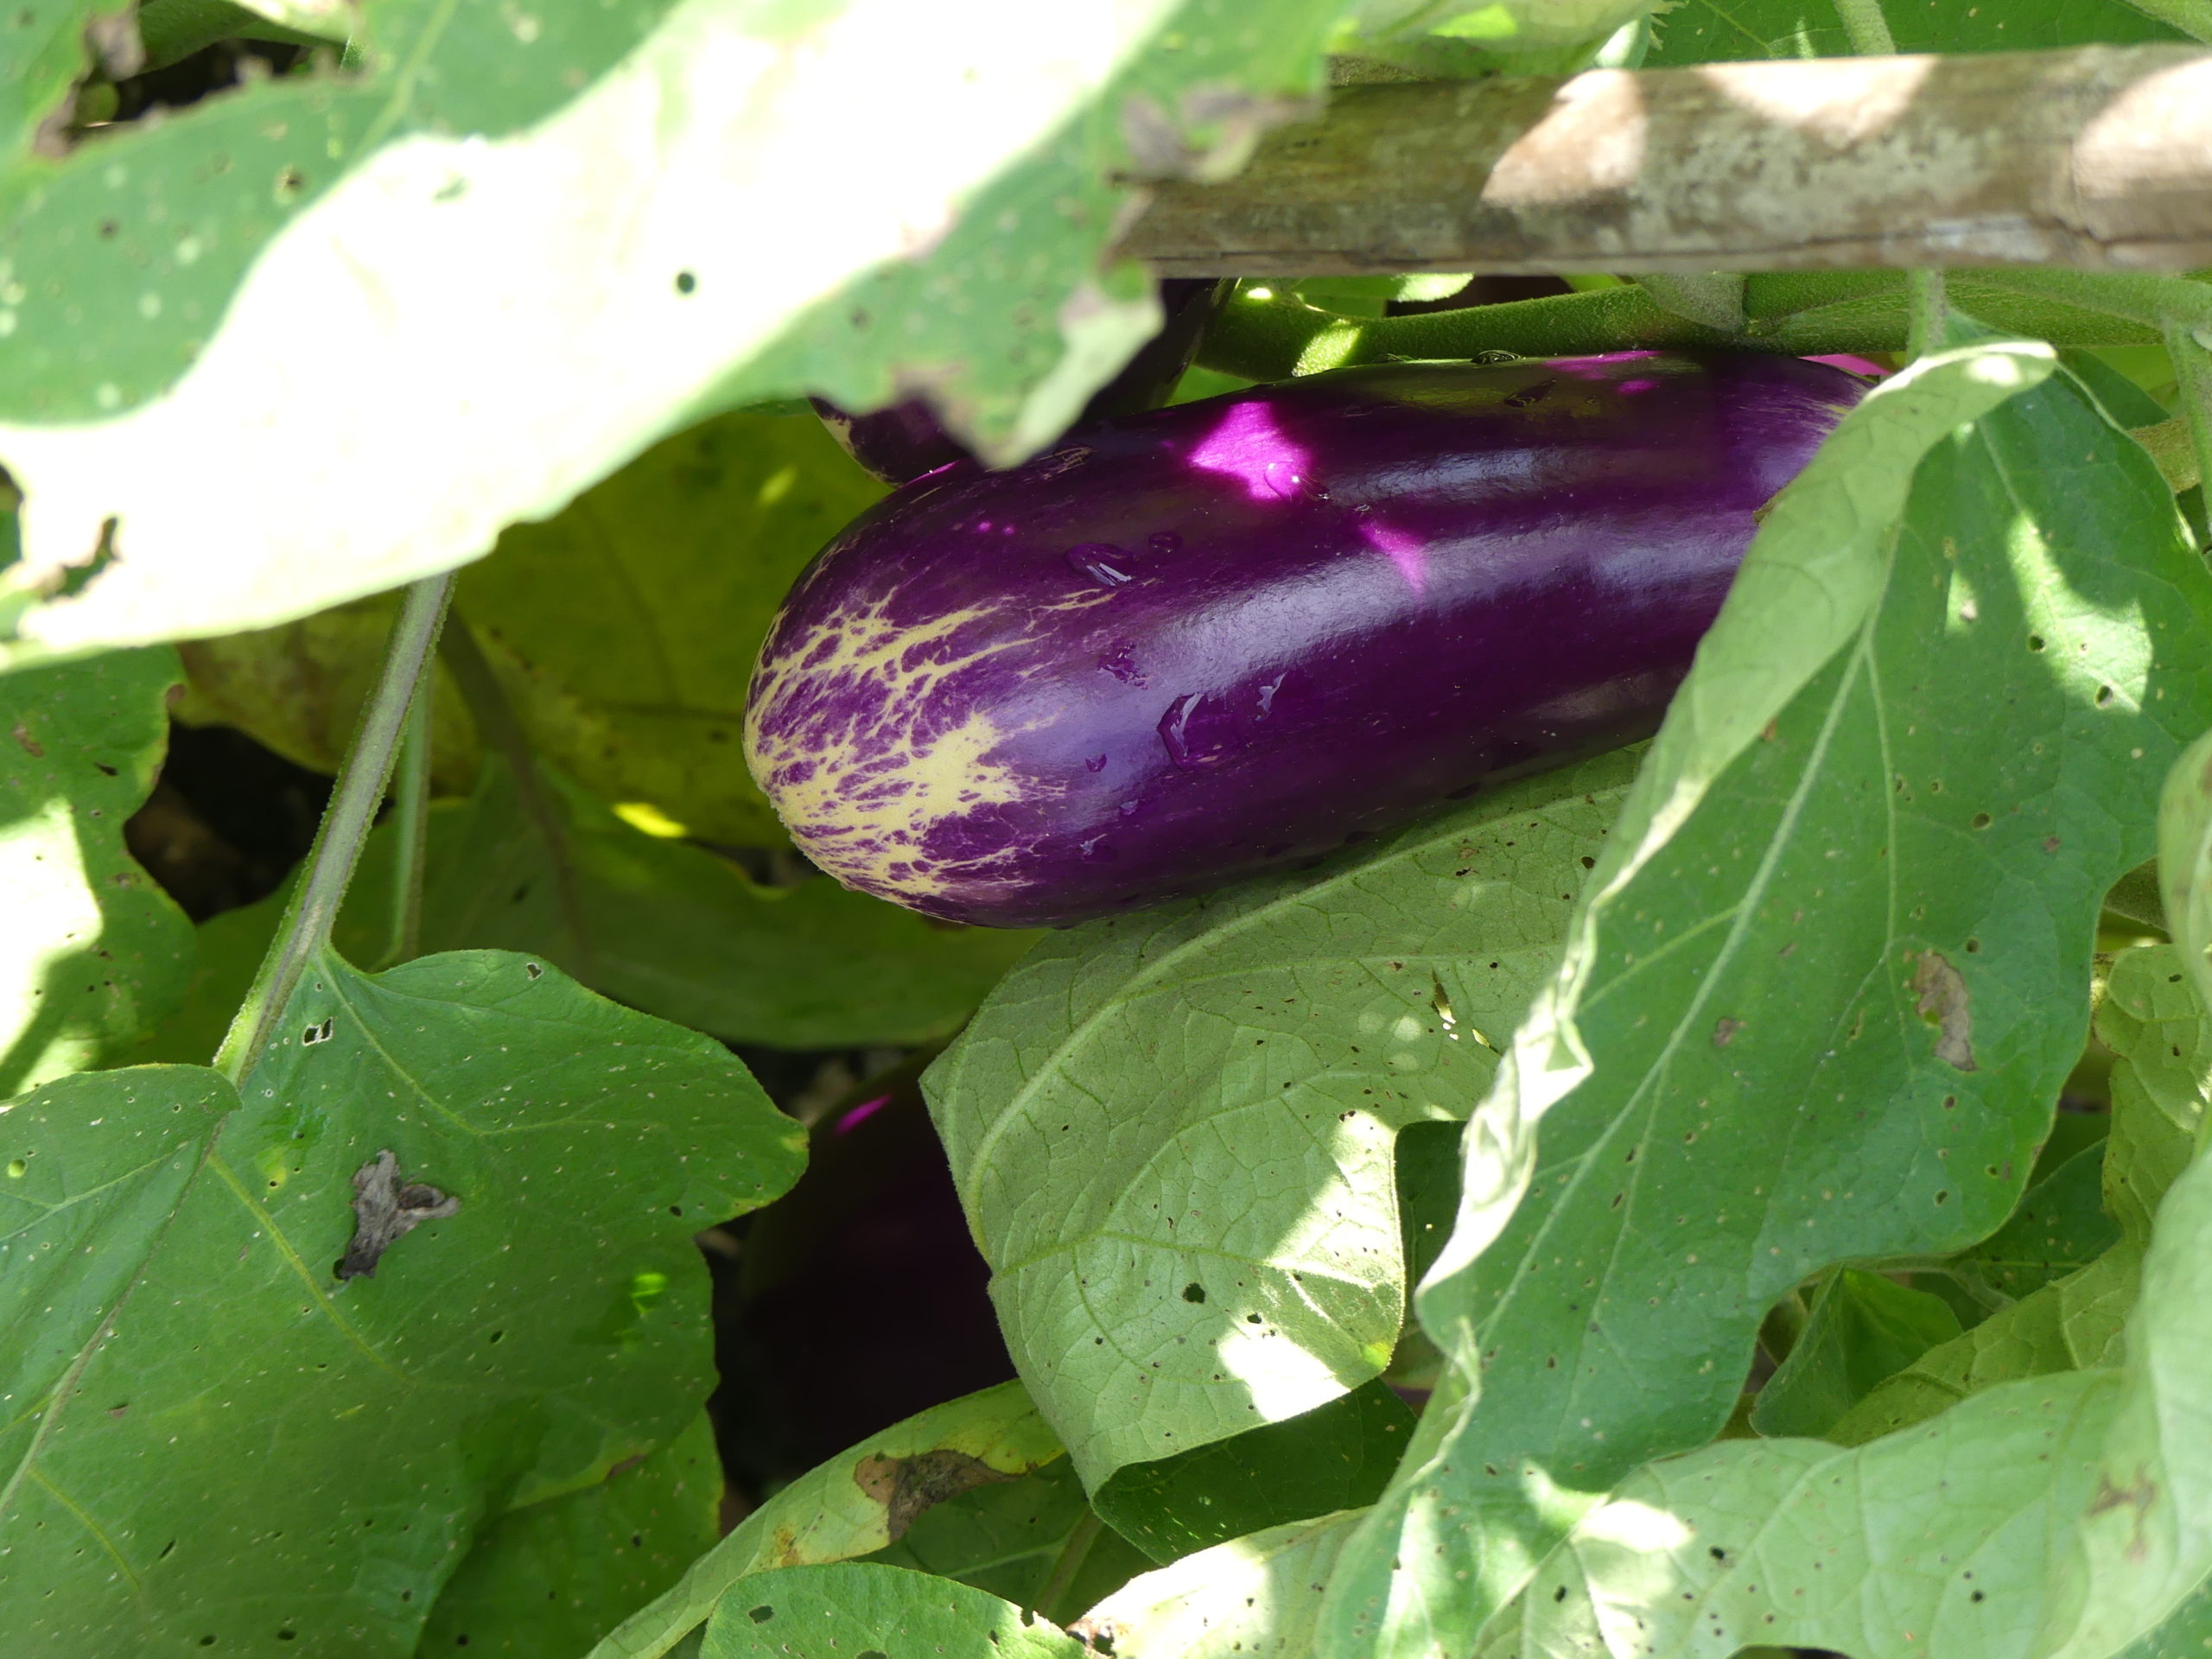 This ready-to-pick purple eggplant is about as big as it should get. Notice the shine on the skin, which is one indication of it being ready for harvest.